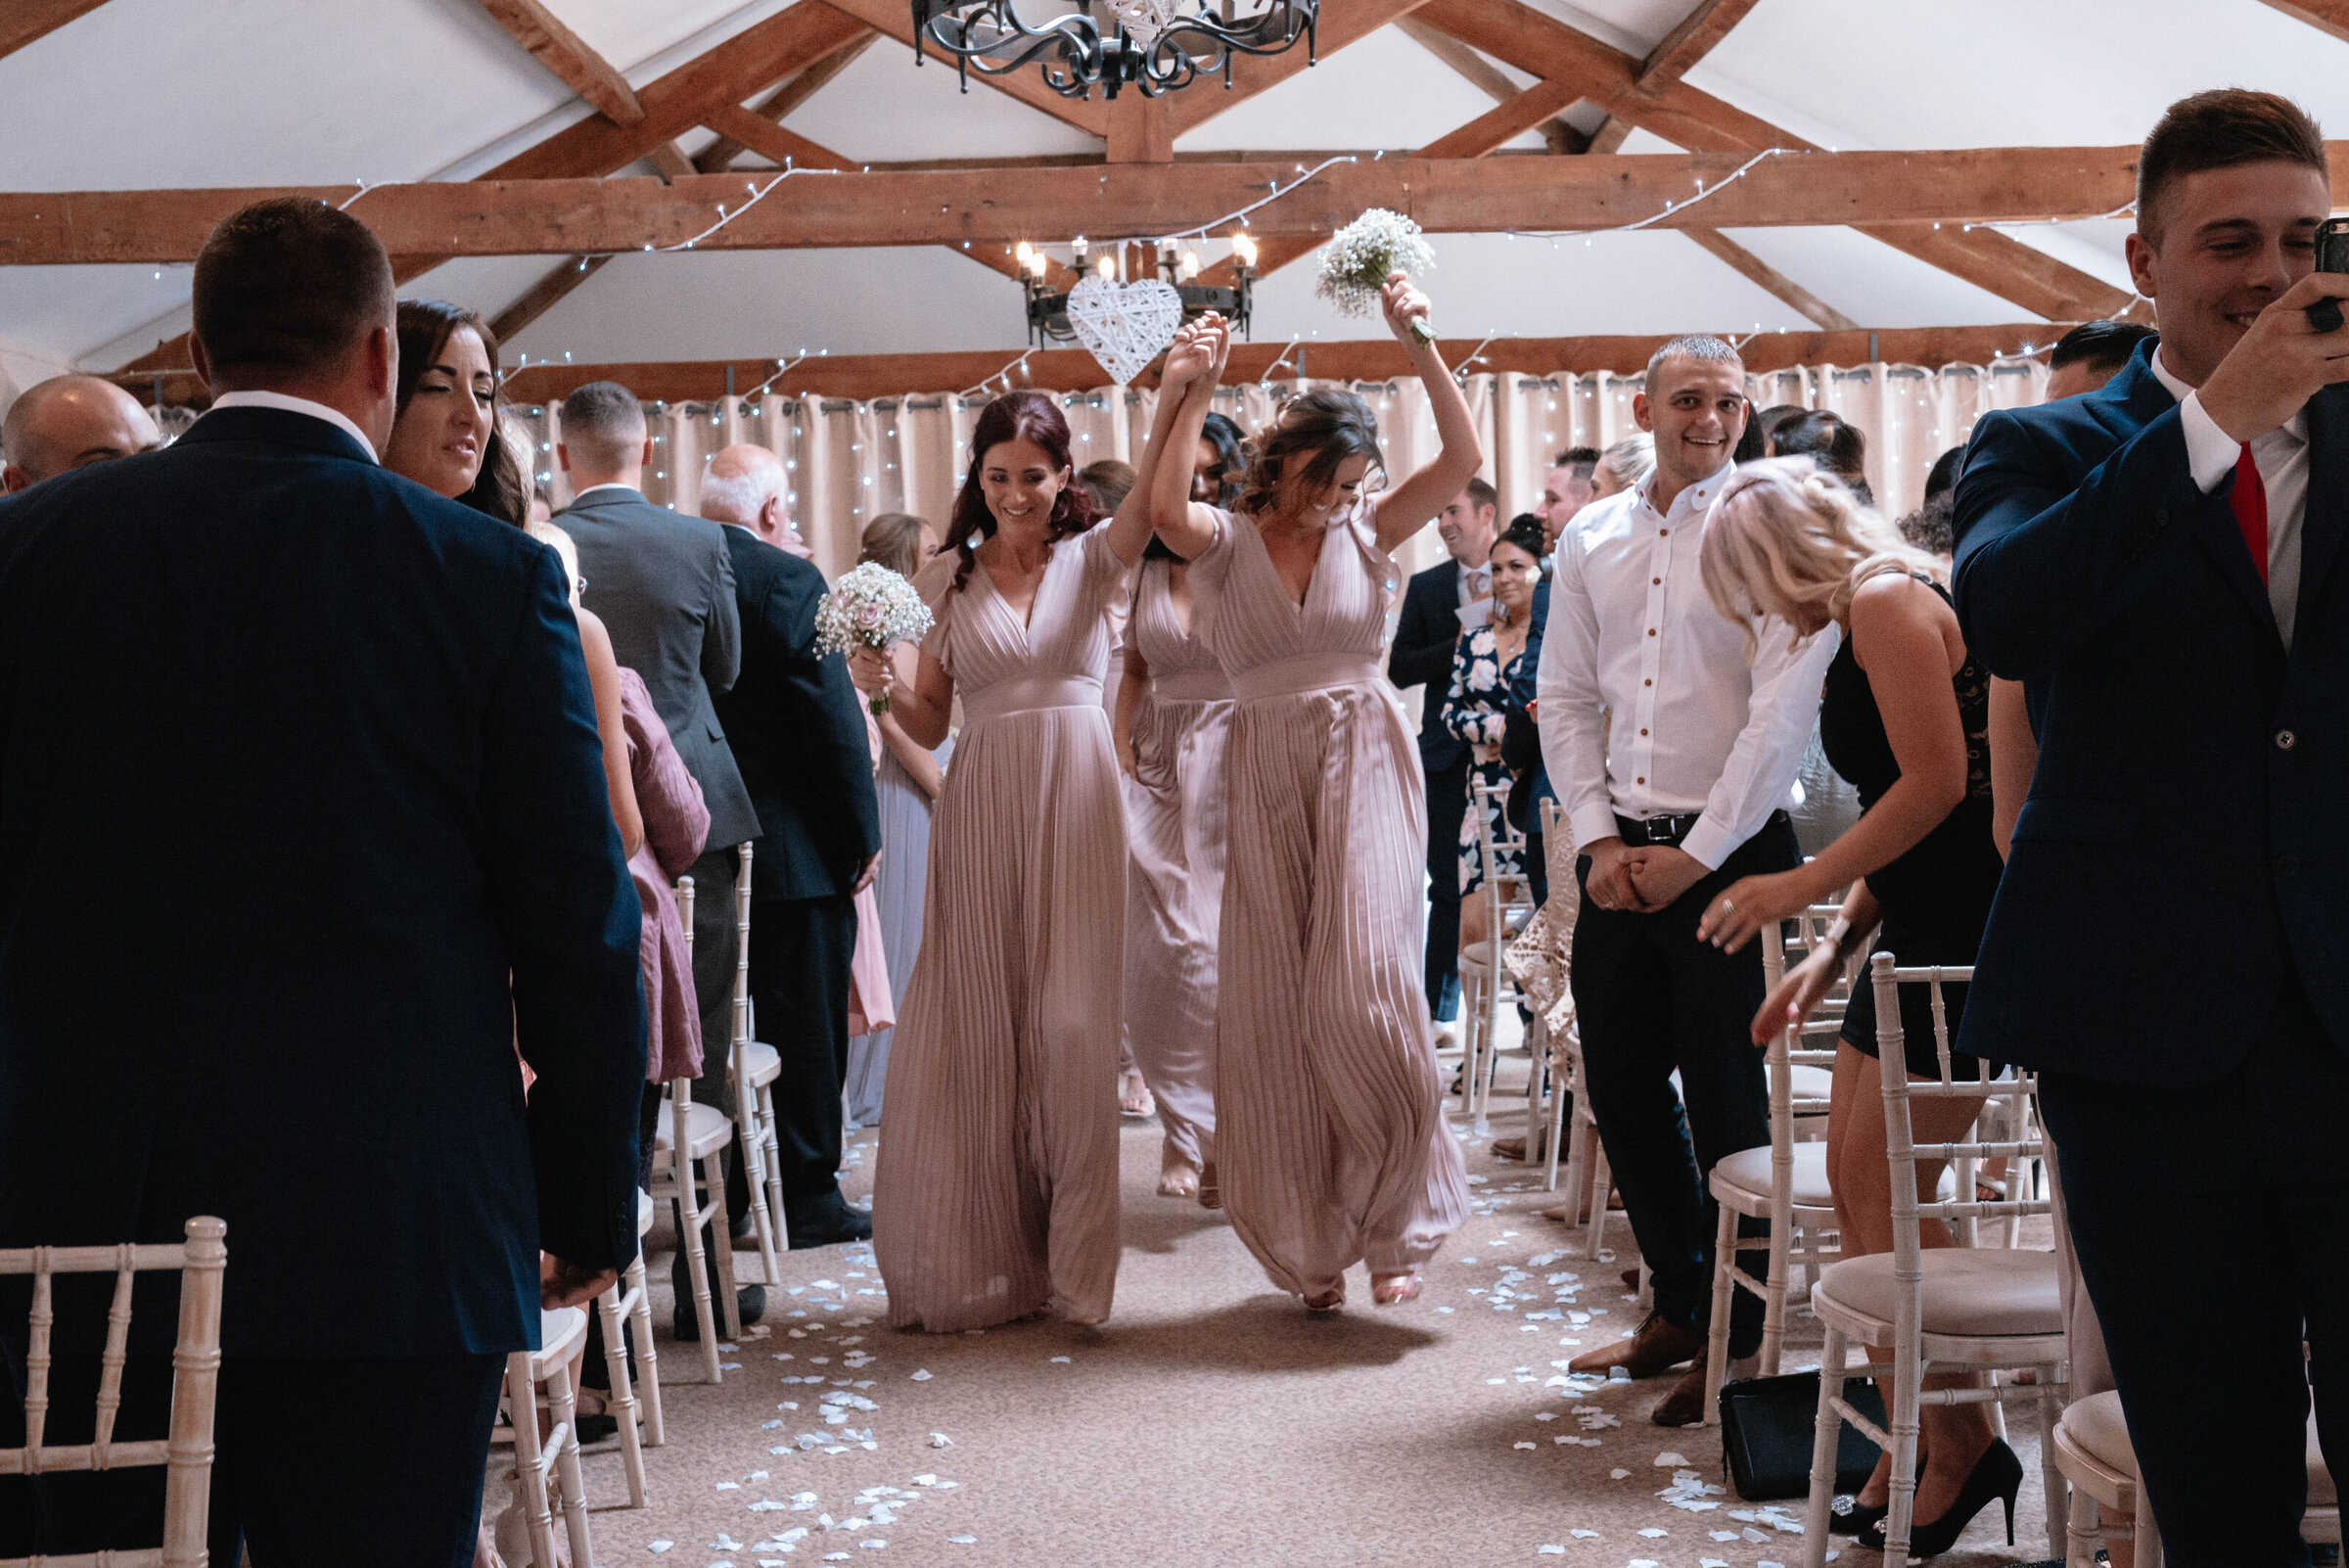 Bridesmaids dancing down the aisle holding their bouquets in the air whilst wedding guests clap